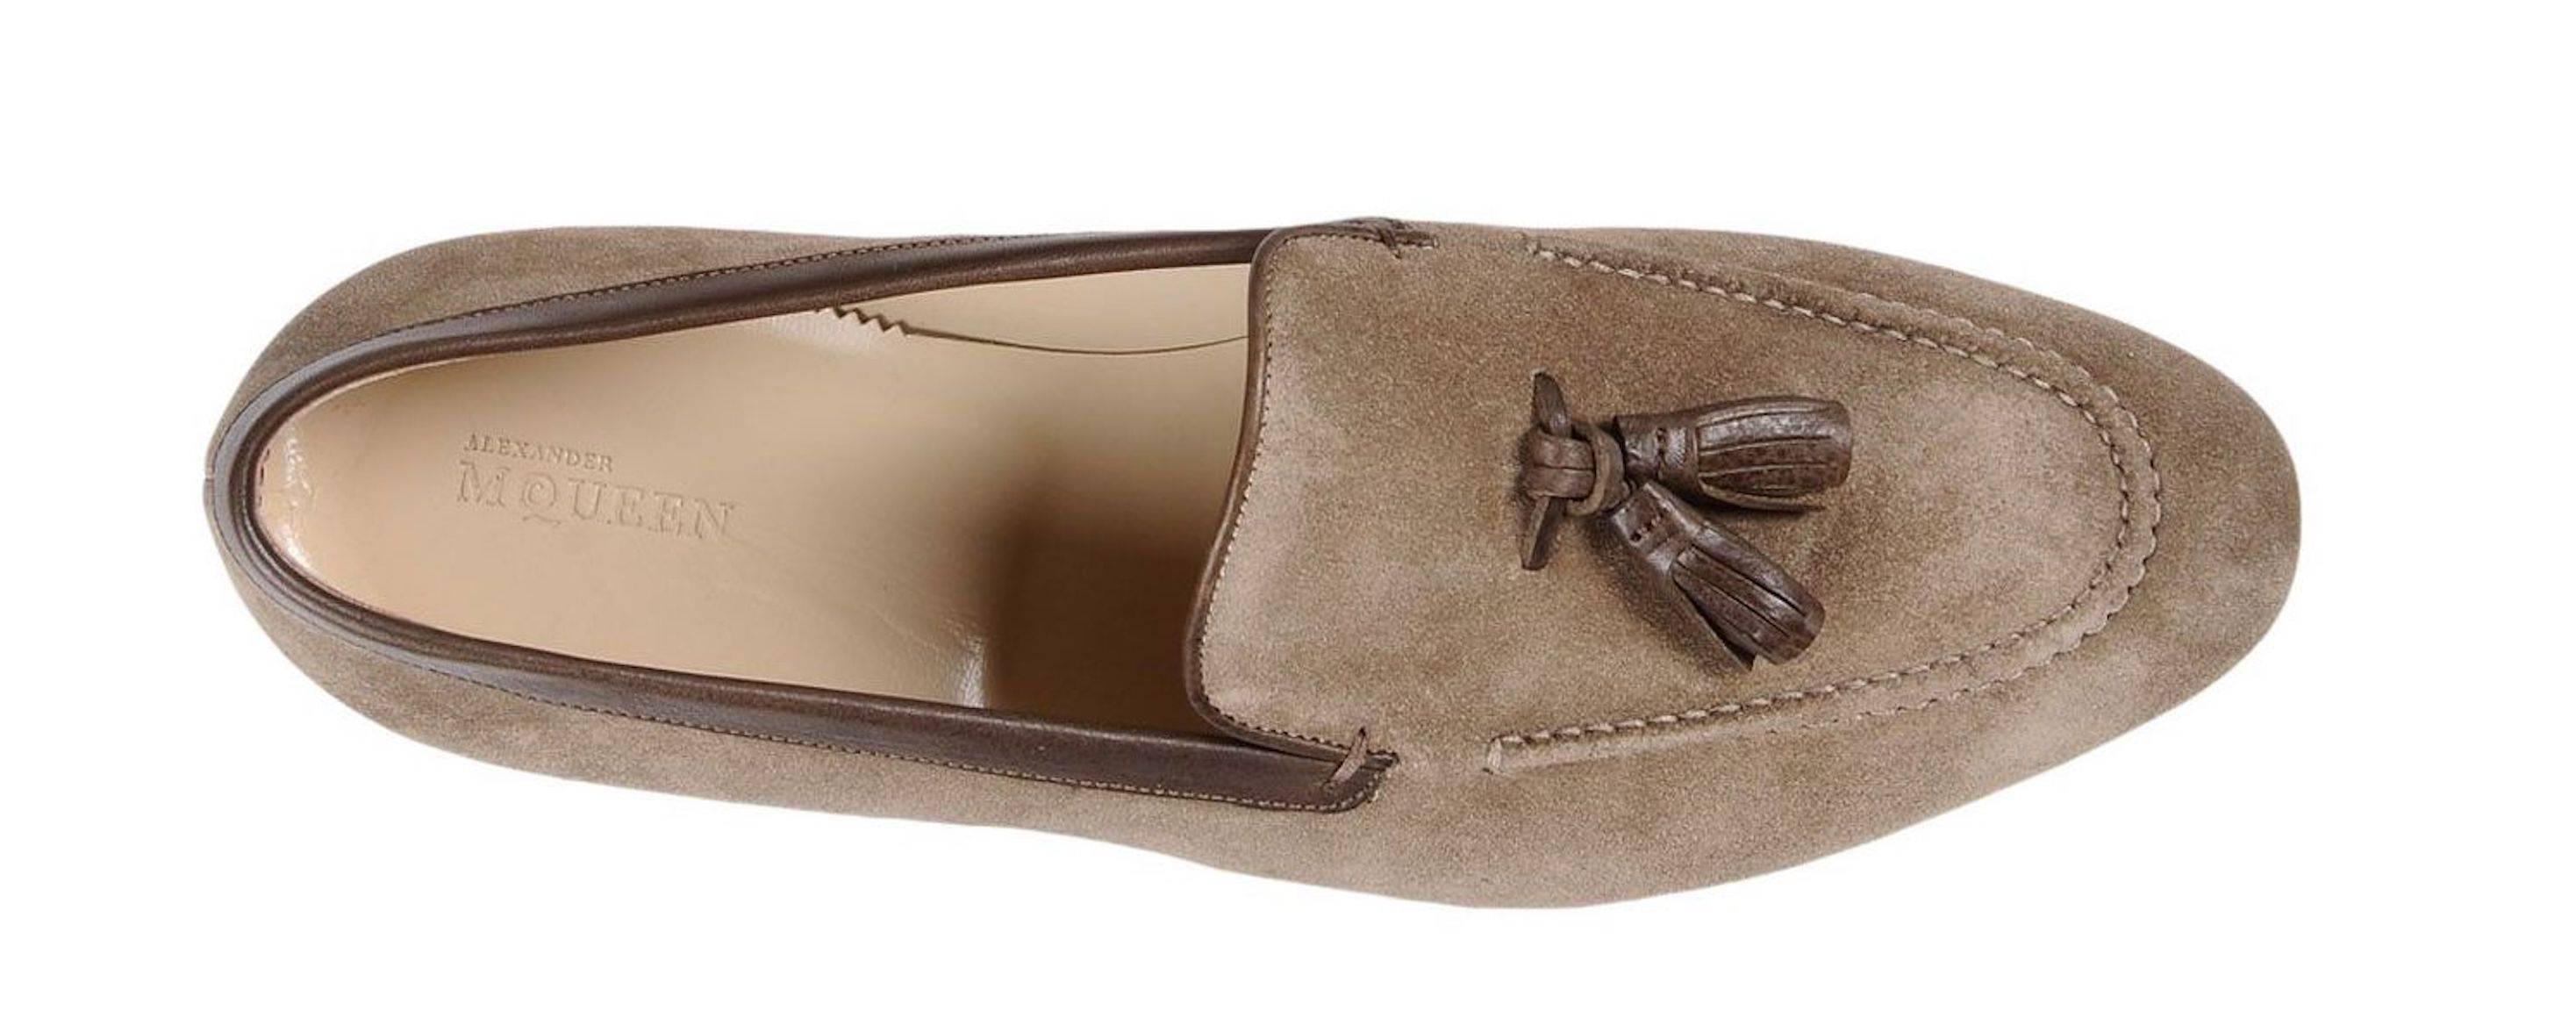 CURATOR'S NOTES

Alexander McQueen New Men's Tan Brown Suede Loafers Smoking Slippers in Box  

Size IT 44 (US 11)
Suede
Leather
Slip on 
Made in Italy
Heel height 0.75